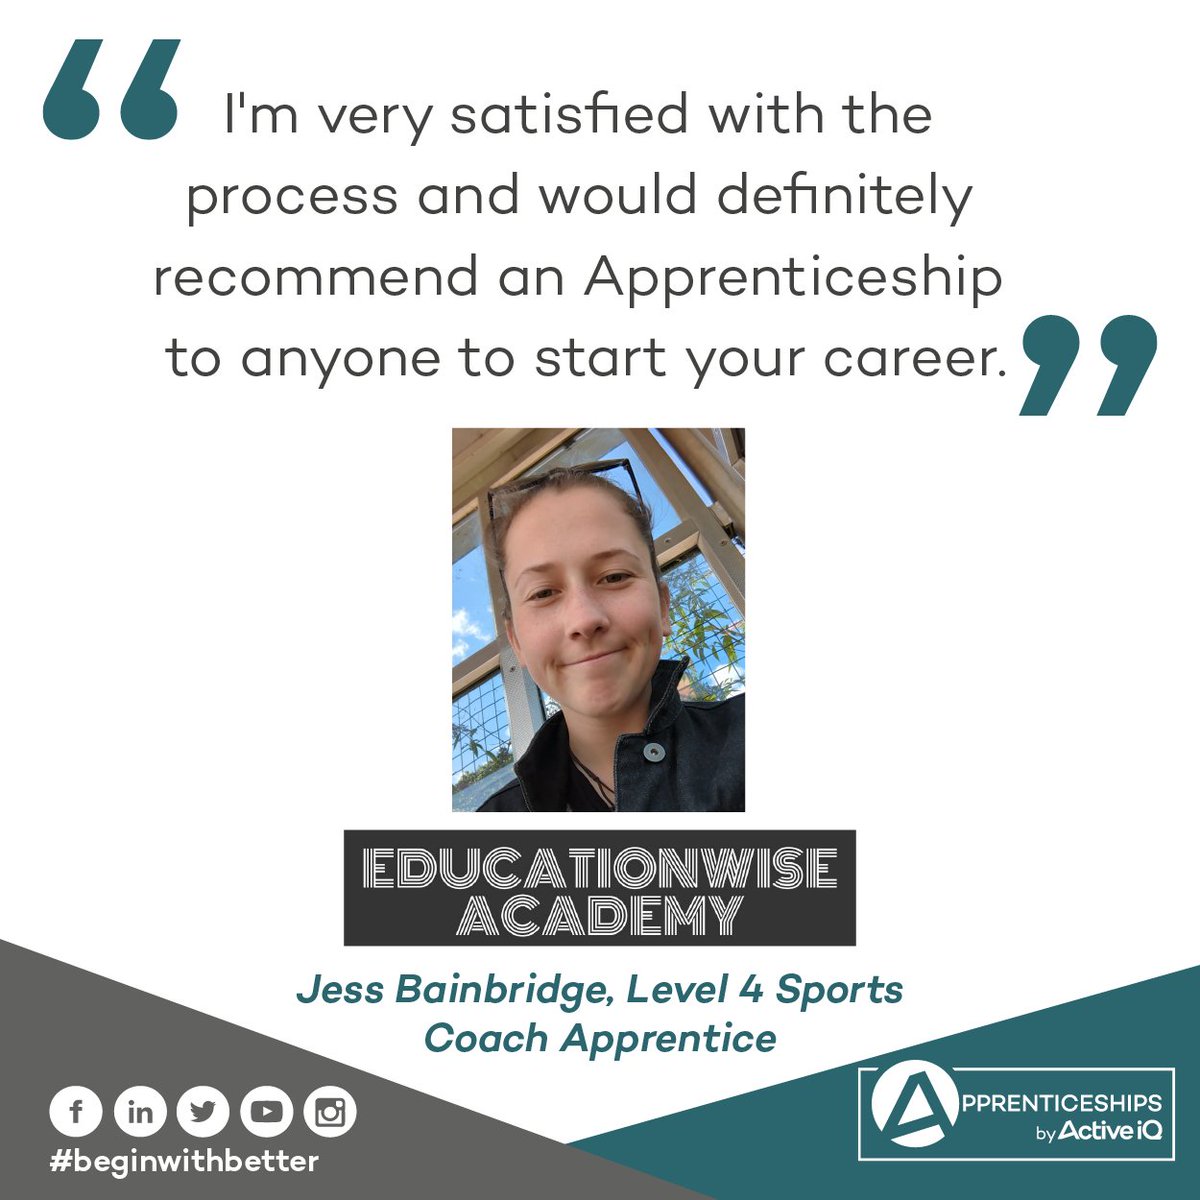 Today we share a testimonial from one of our apprenticeship provider’s apprentices, Jess Bainbridge, who took their apprenticeship with @educationwiseuk